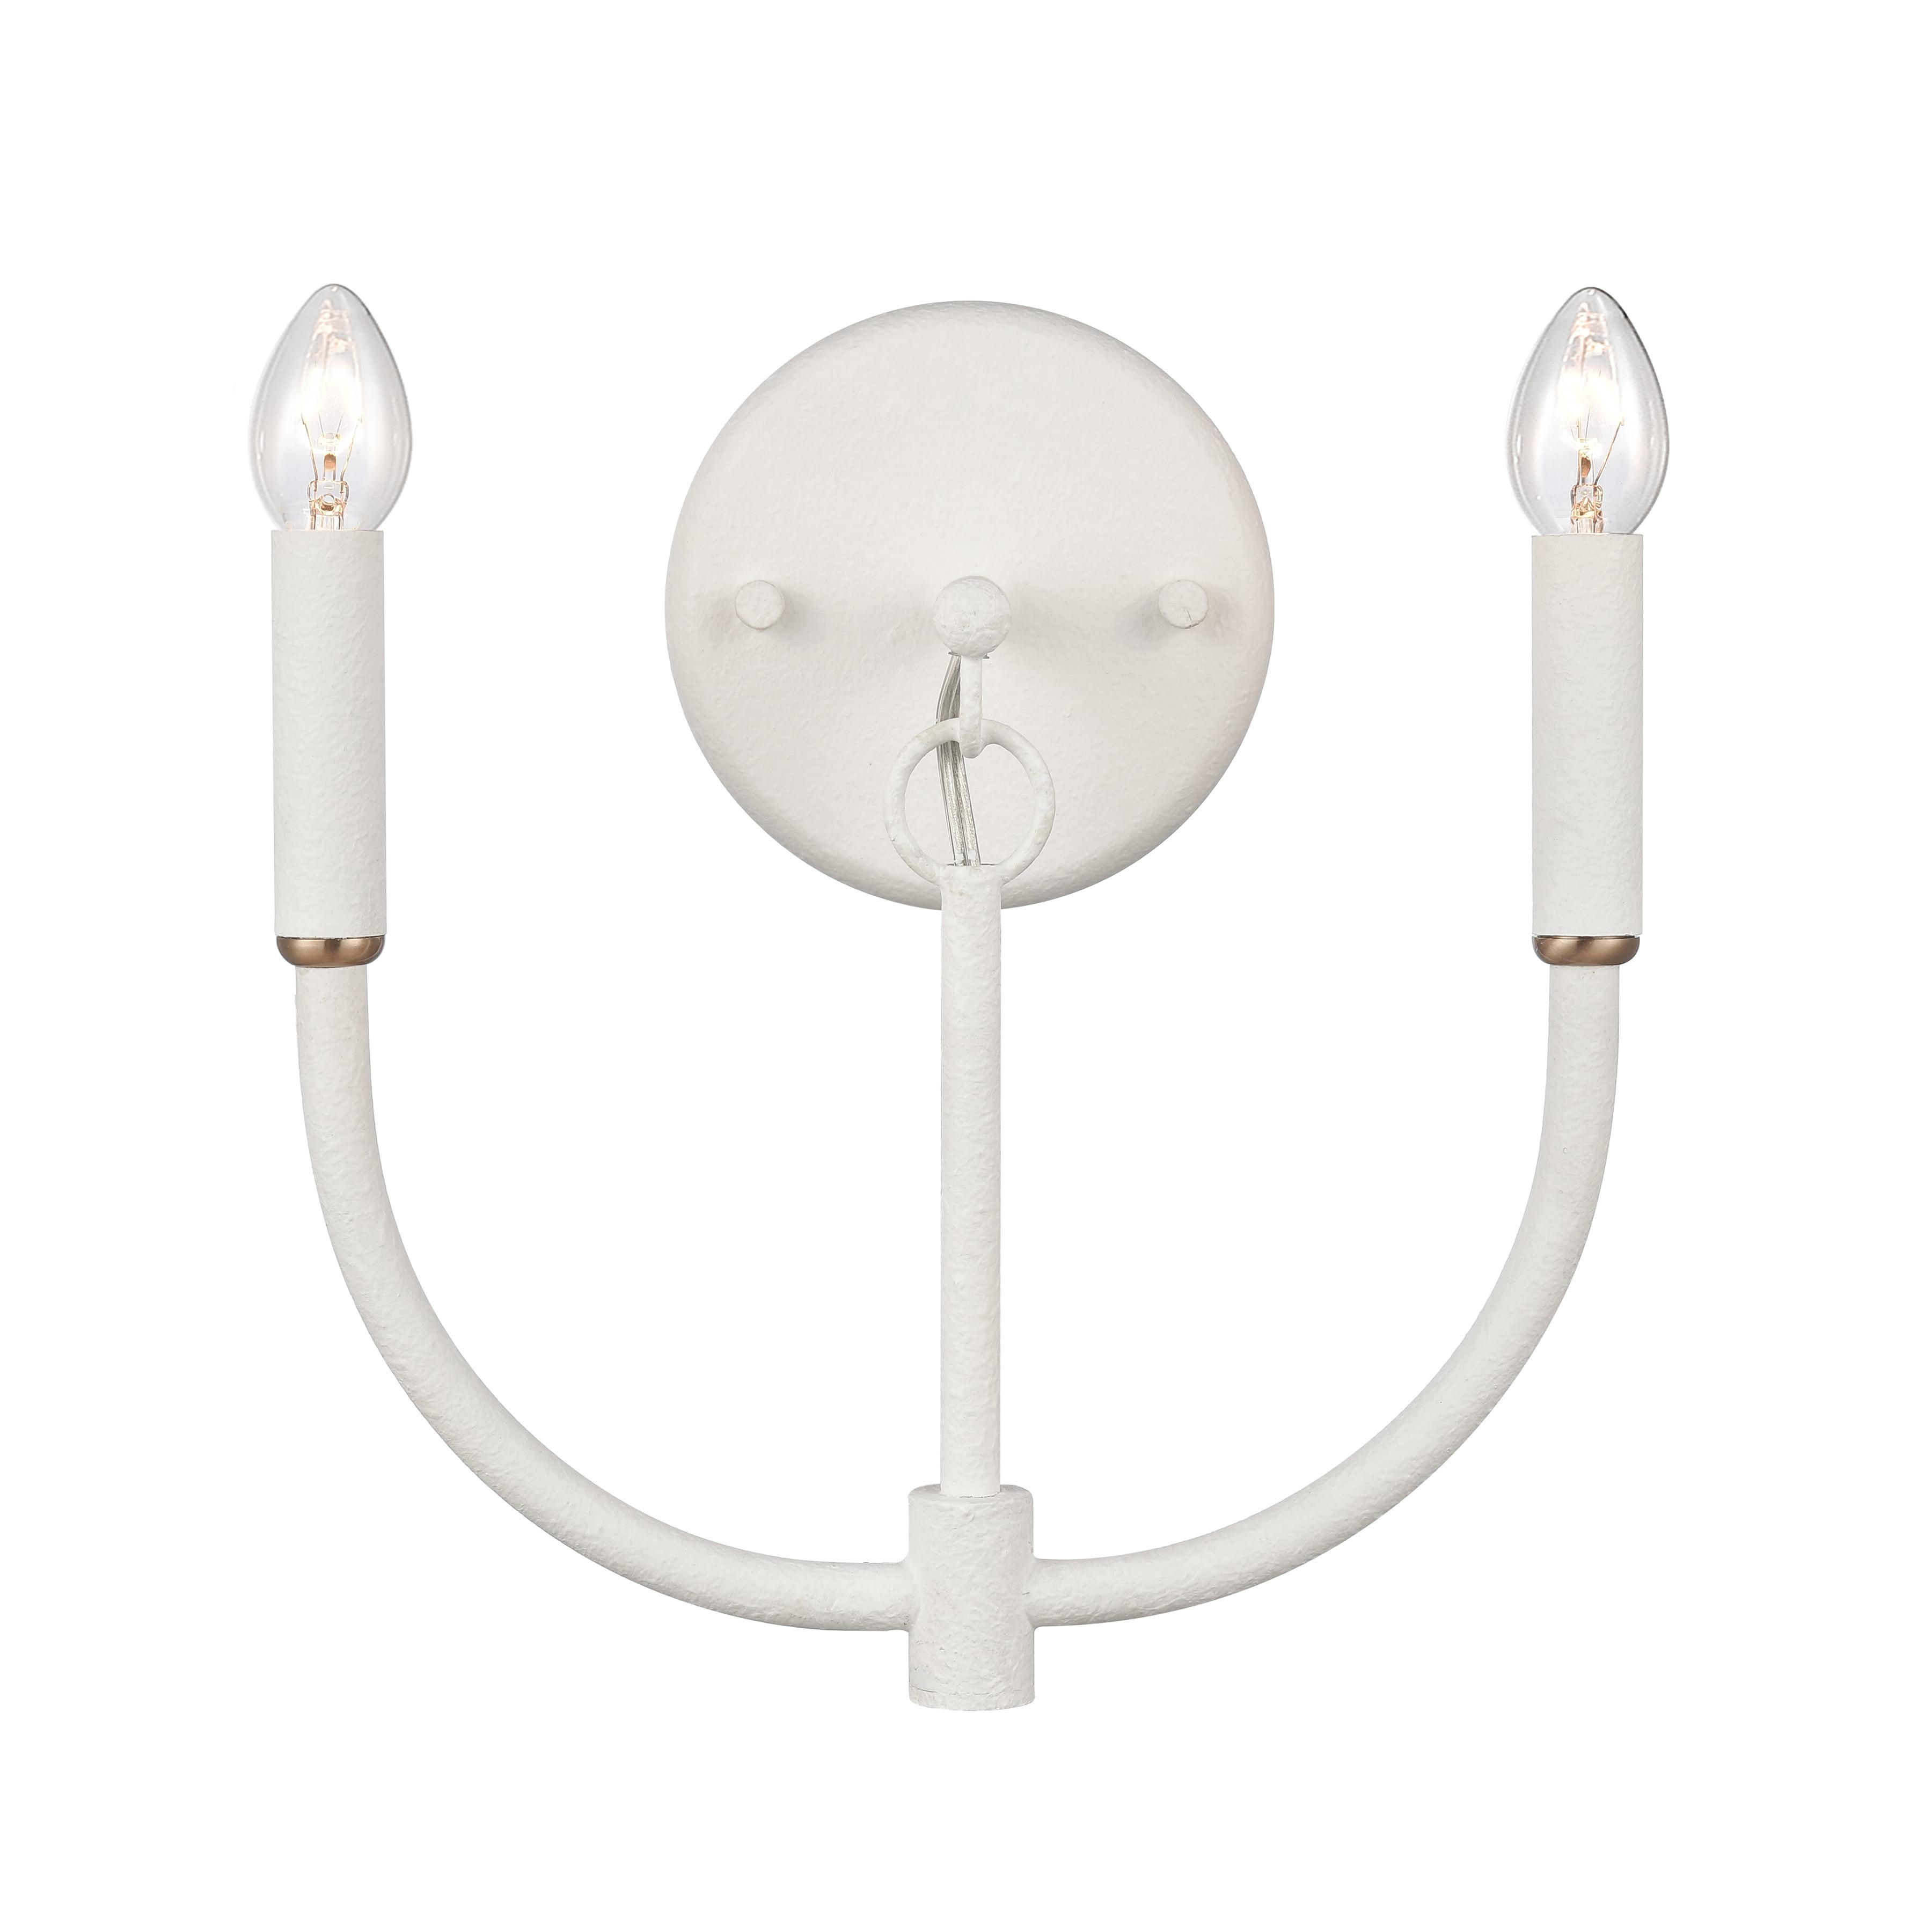 Continuance White Coral and Satin Brass 2-Light Dimmable Sconce